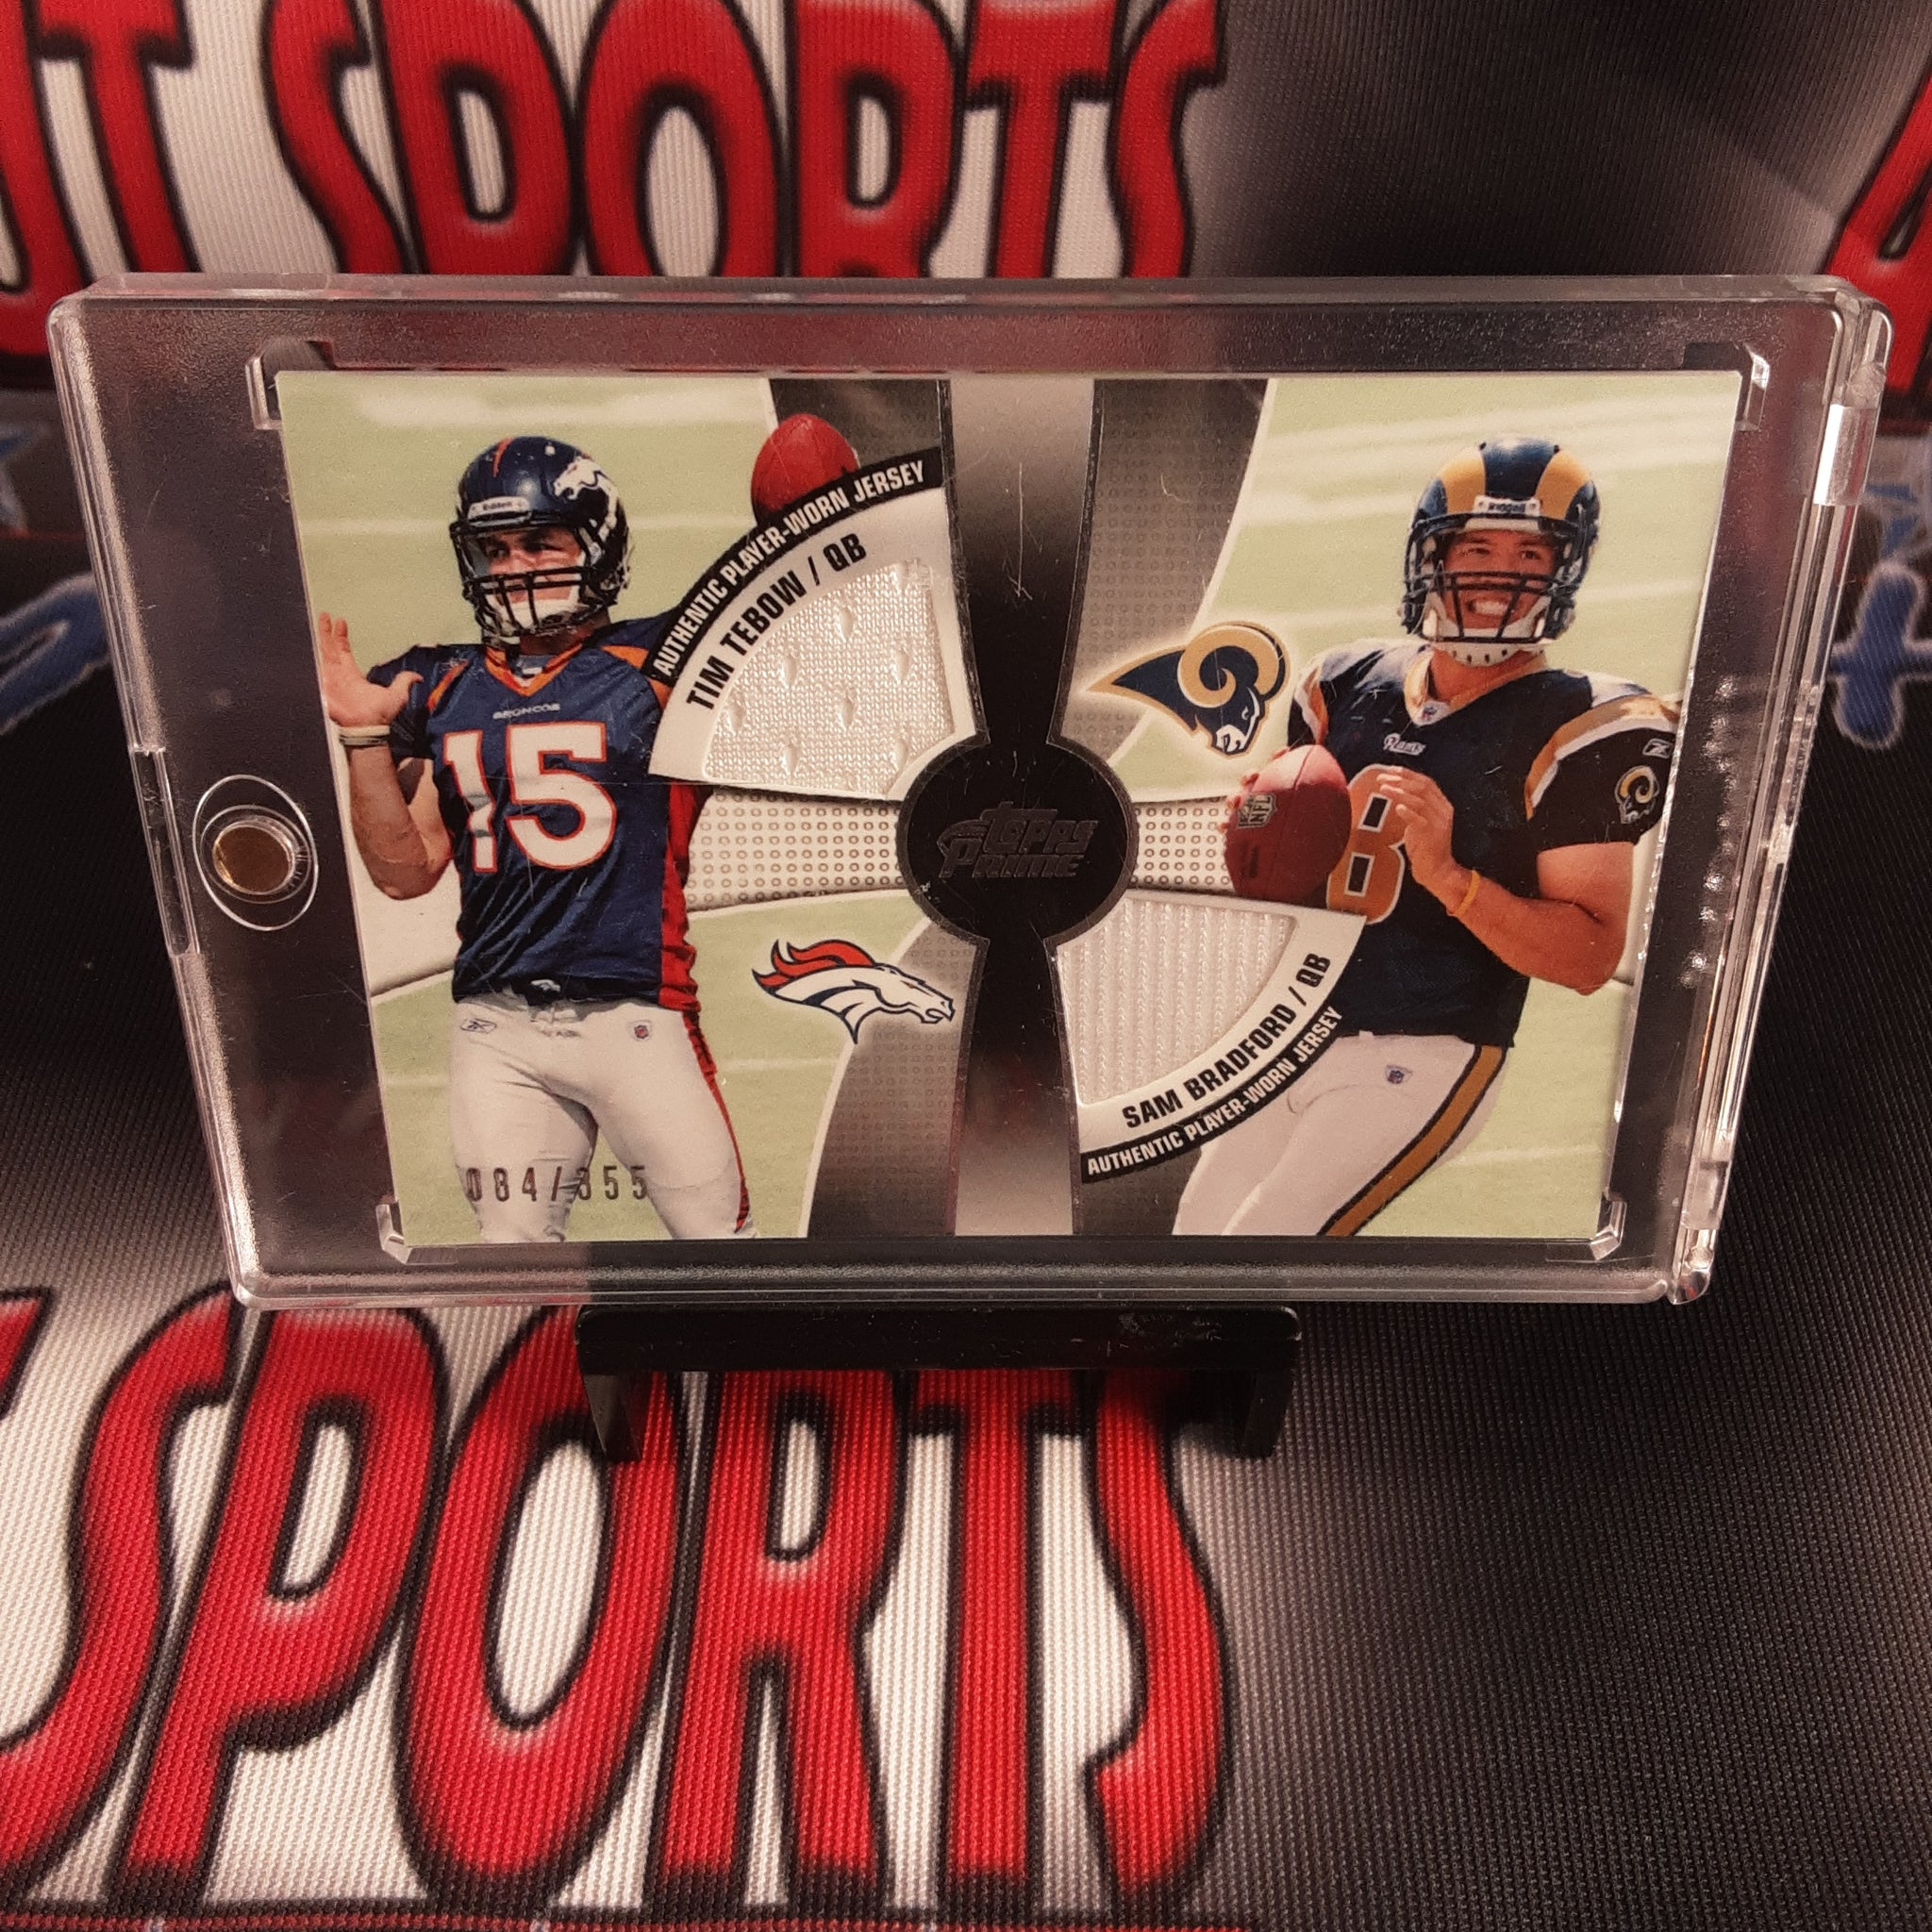 2010 Topps Prime Card #2QR-TB Tebow and Bradford Auto/355